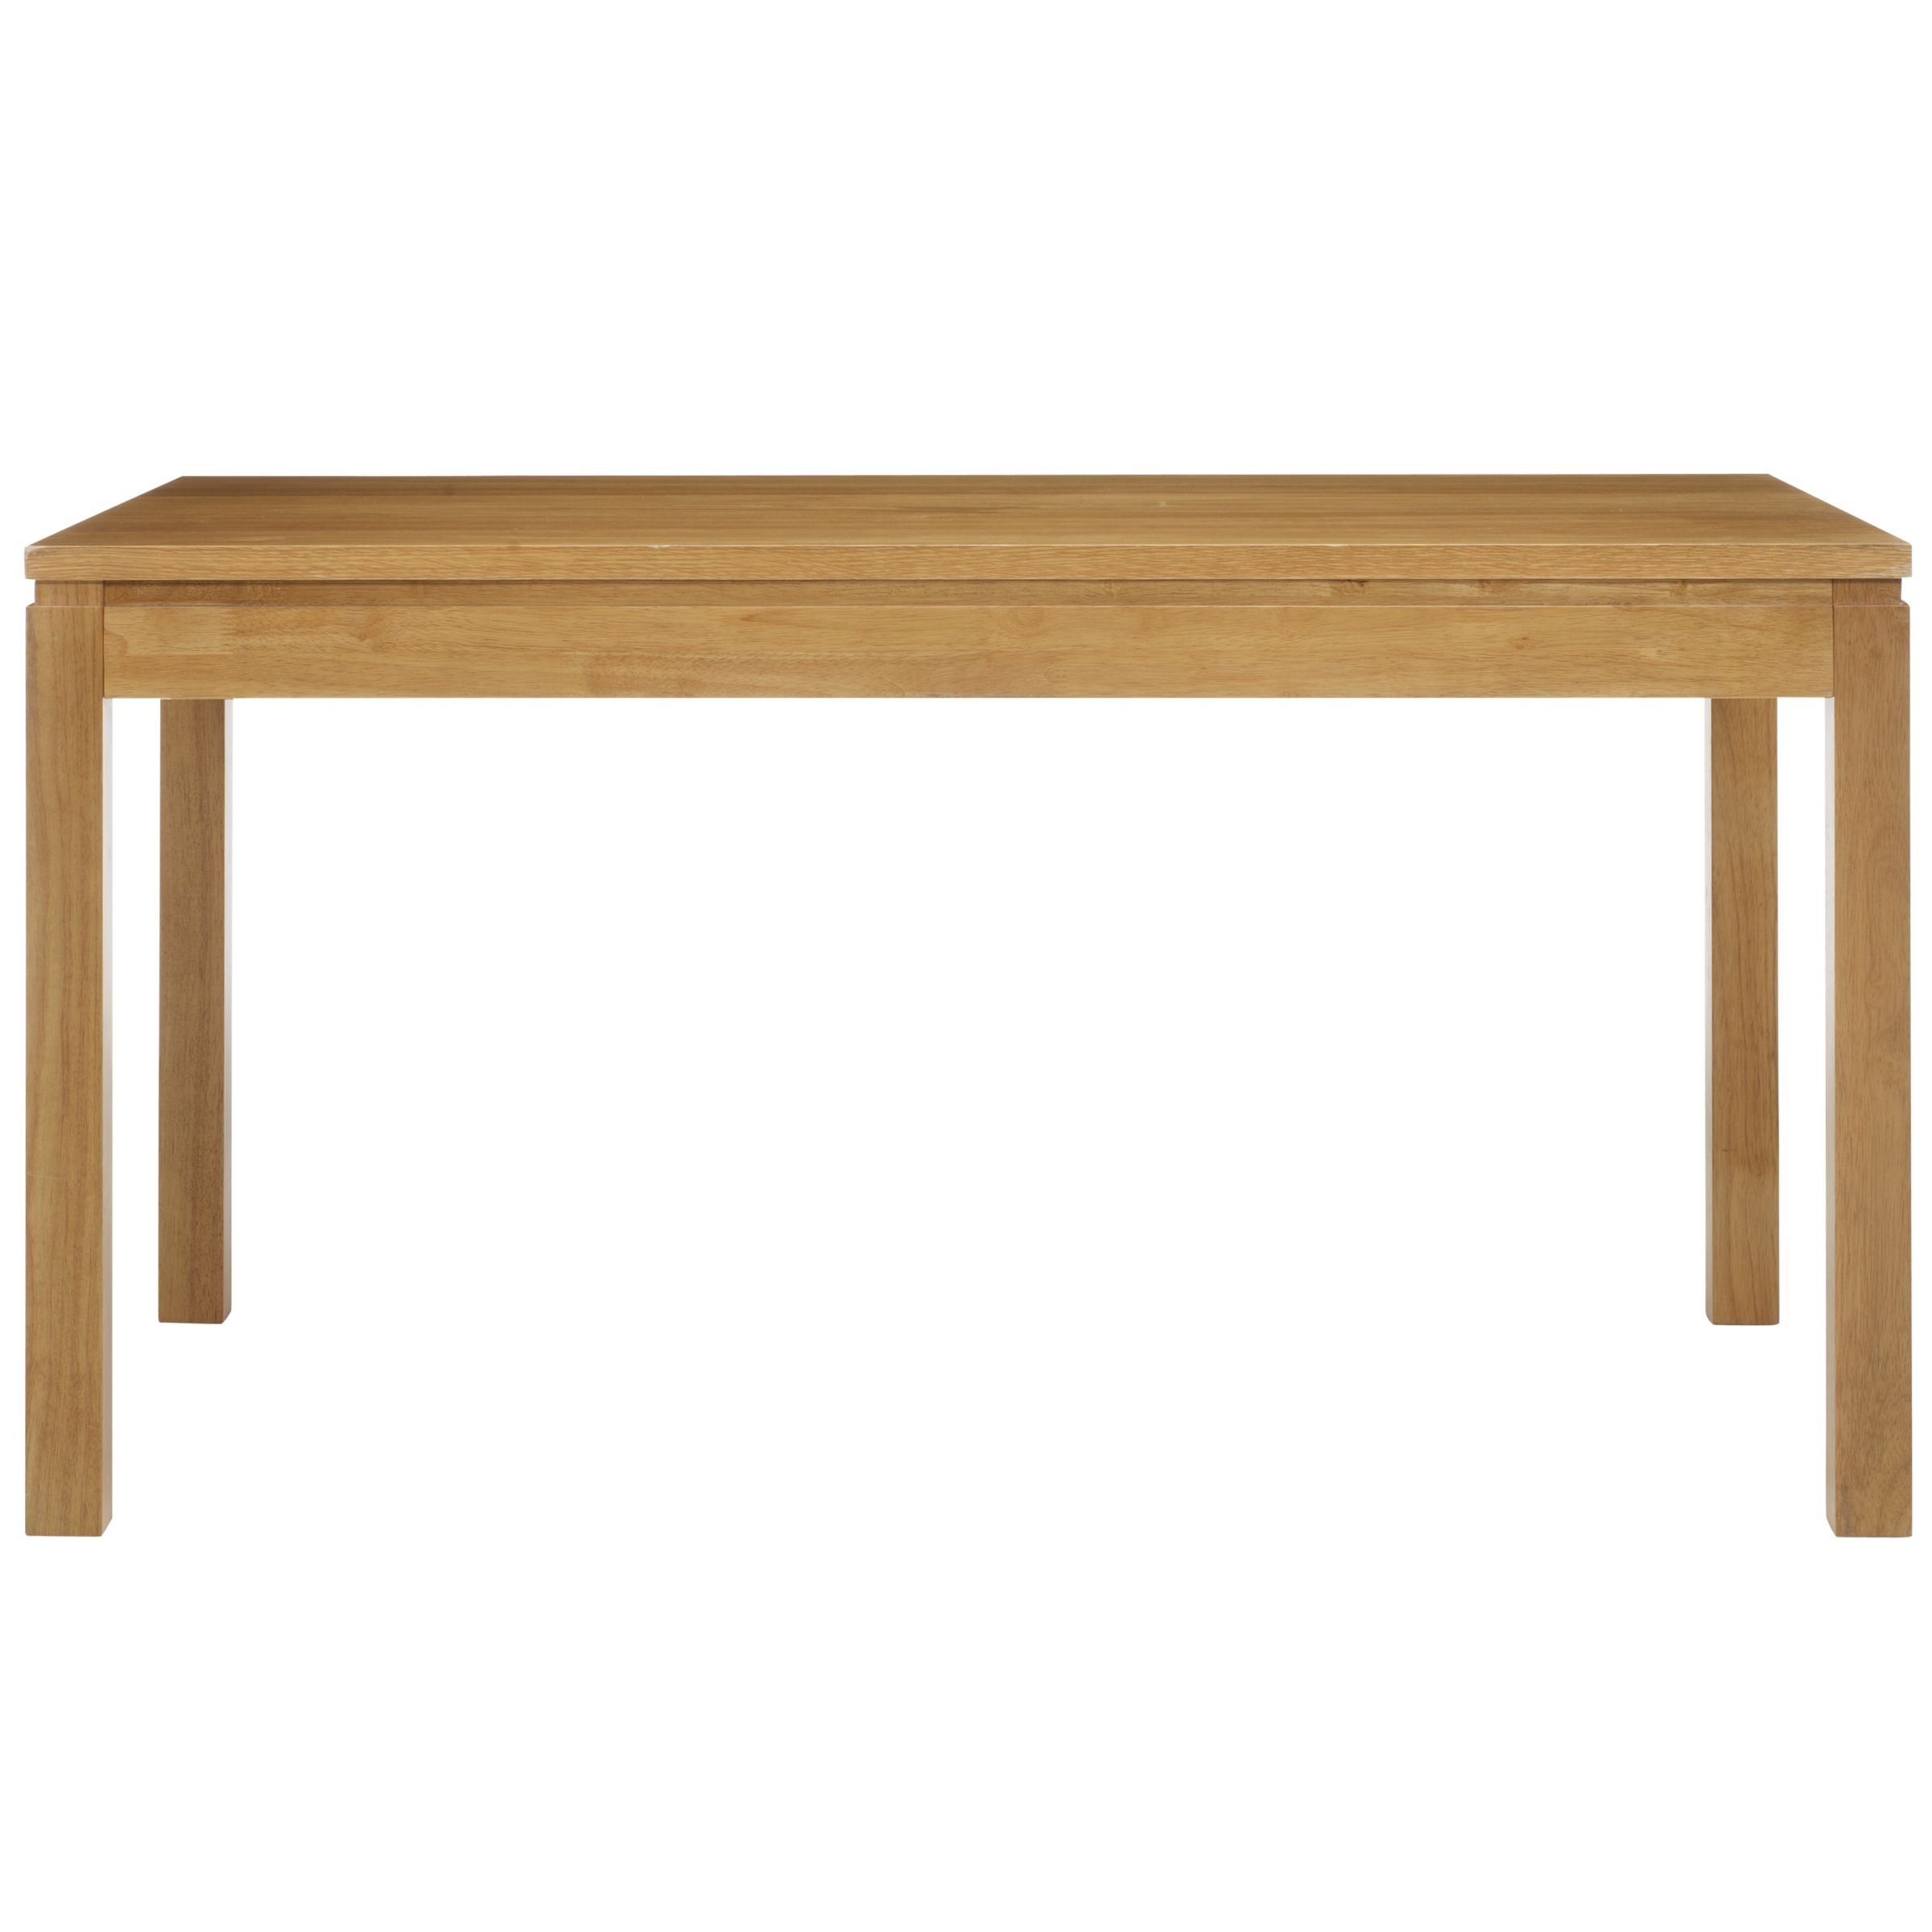 Hereford Dining Table, Light